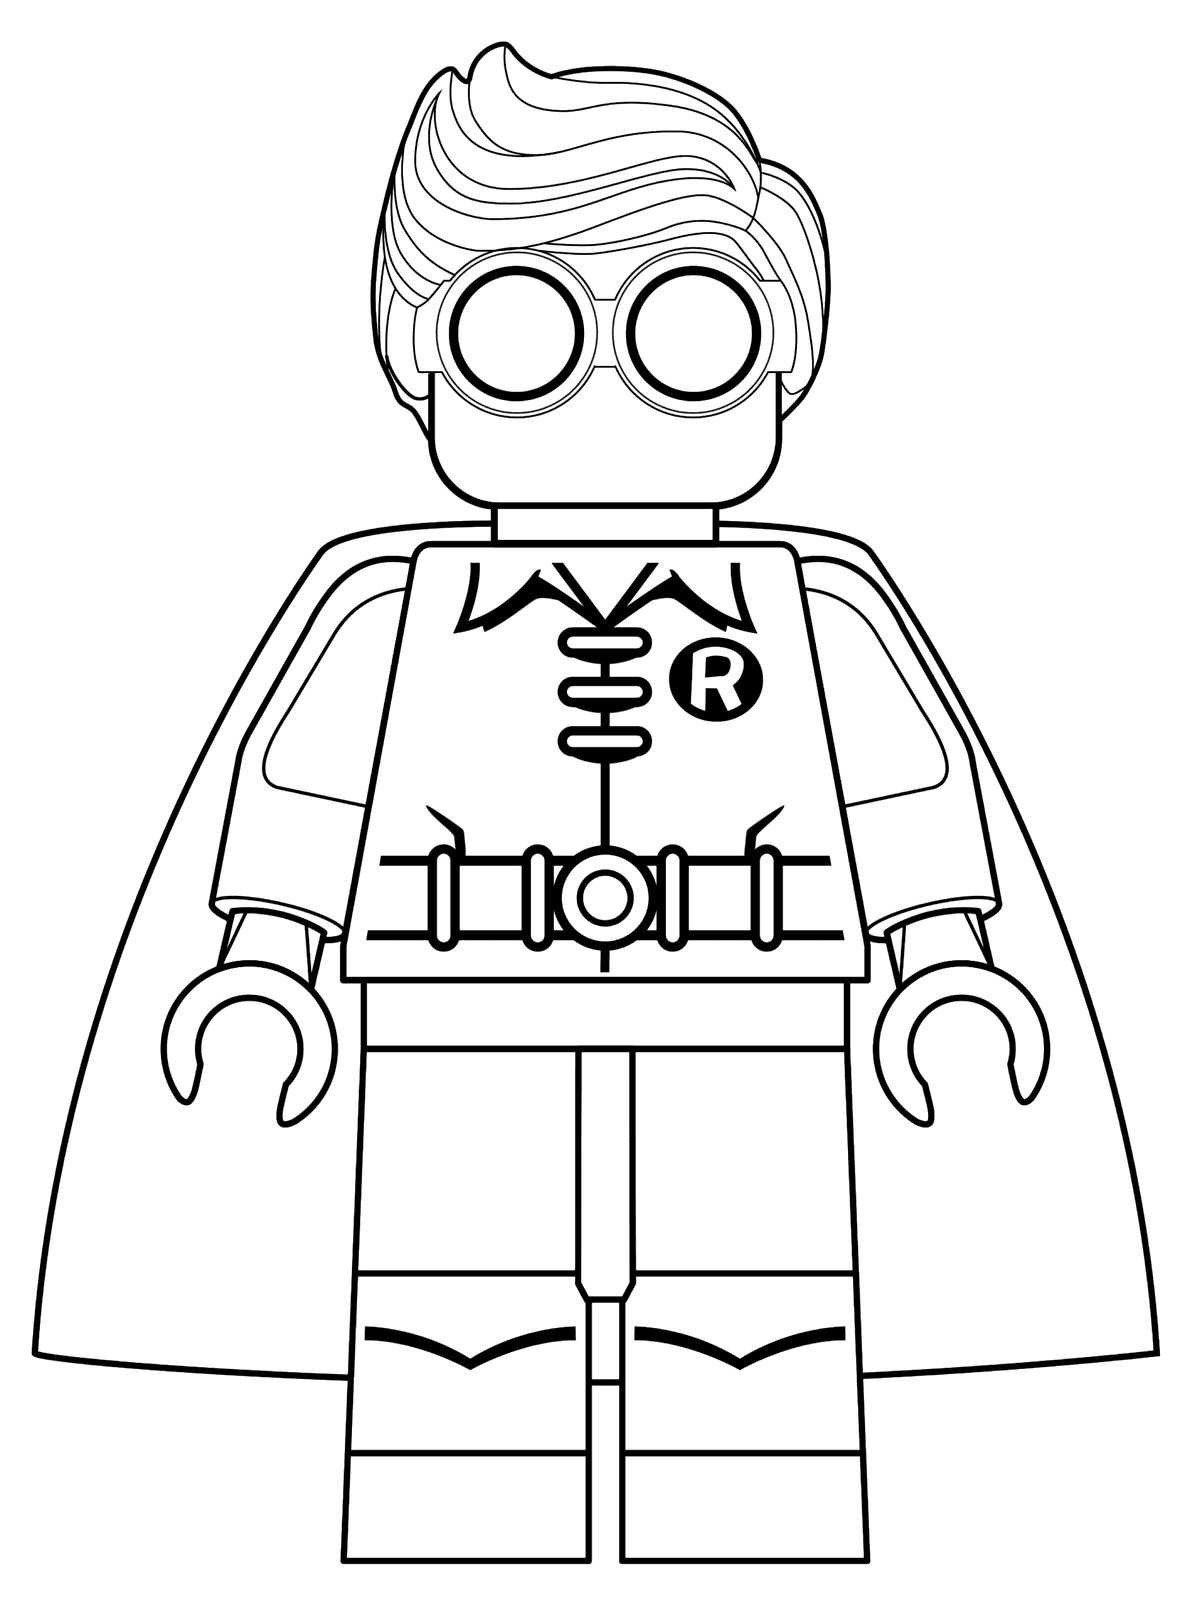 Batman Lego Coloring Pages For Boys
 Kids n fun